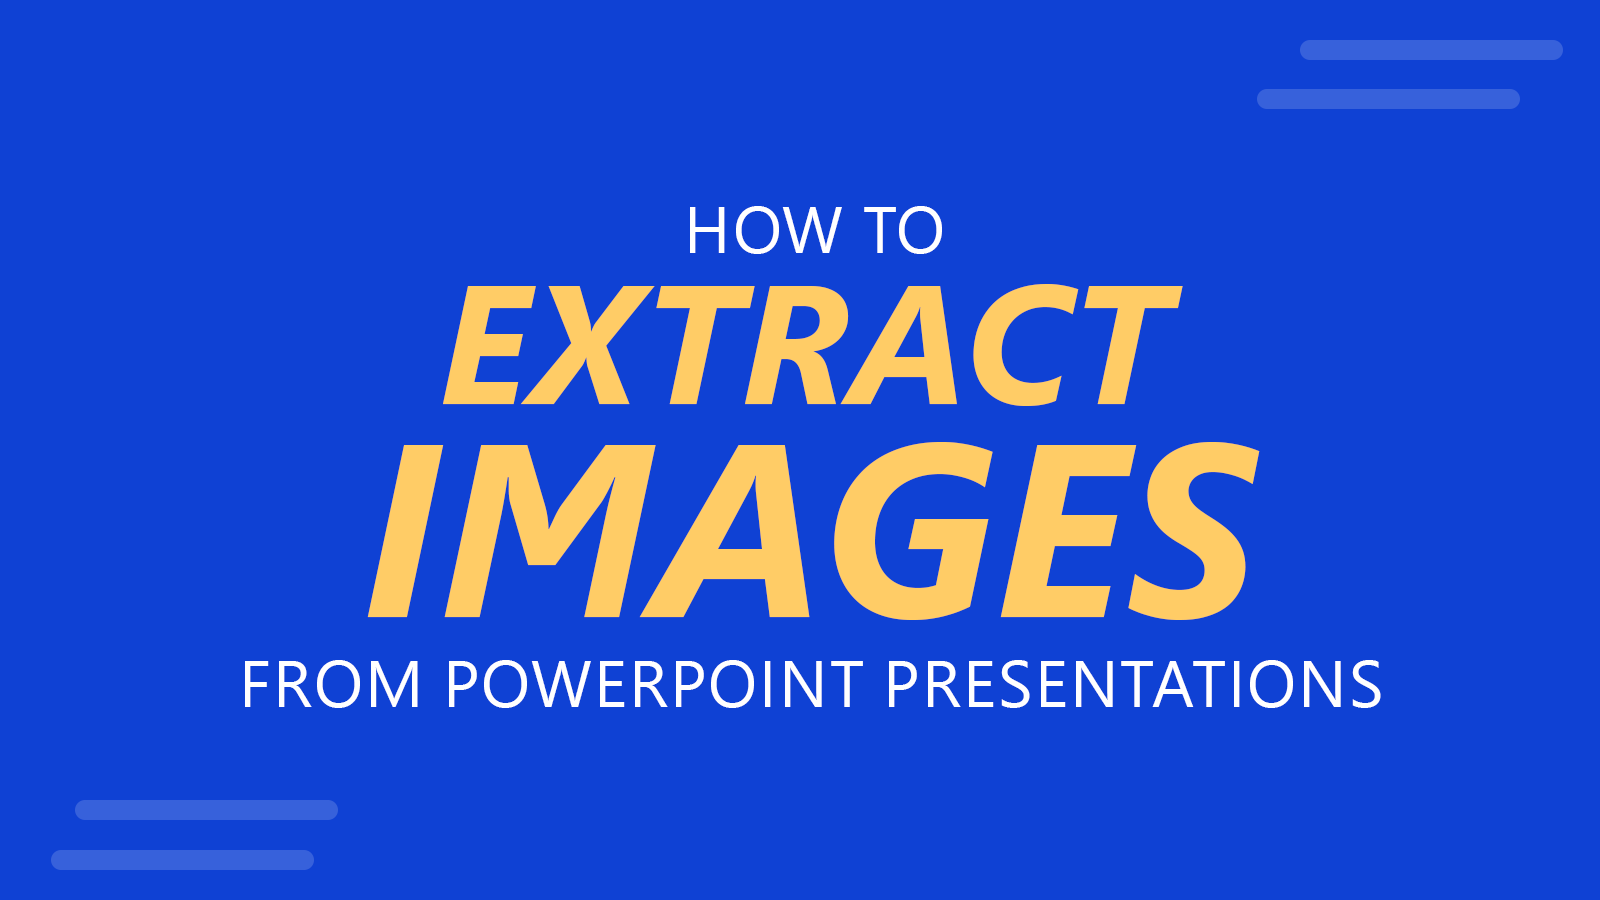 6 Ways to Extract Images from PowerPoint Presentations